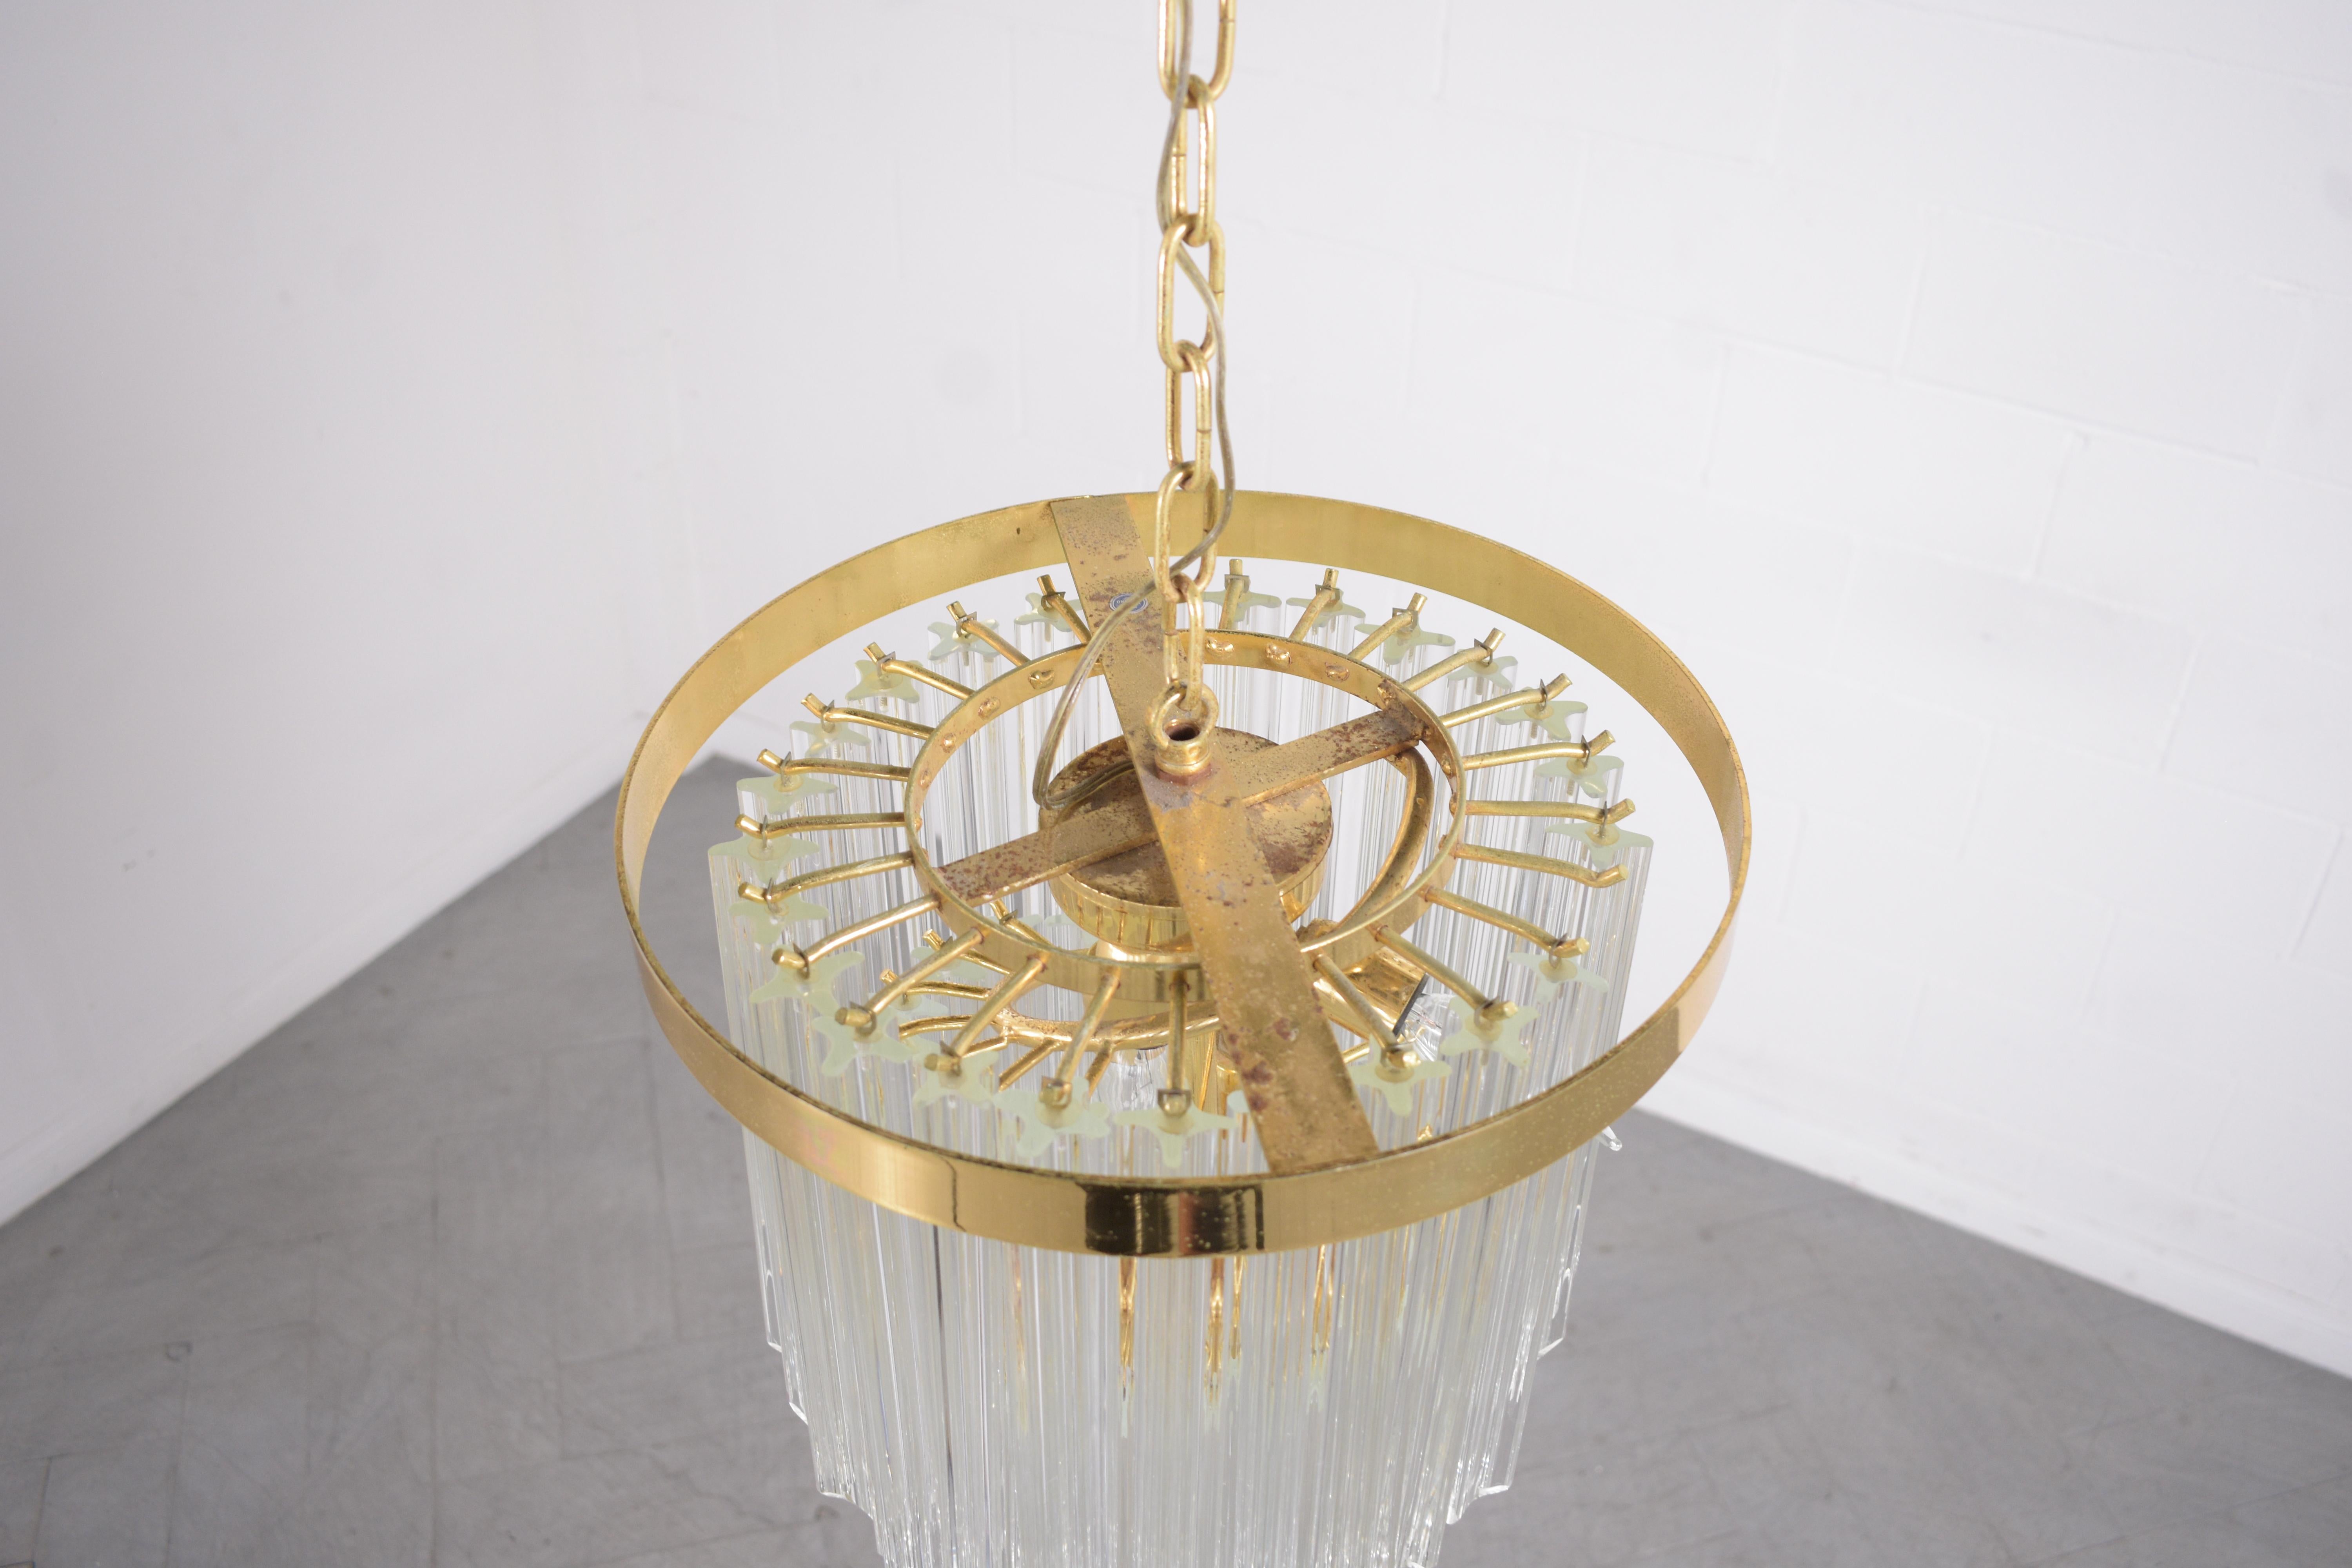 Restored Vintage Brass and Glass Drop Pendant Chandelier with Spiral Pattern In Good Condition For Sale In Los Angeles, CA